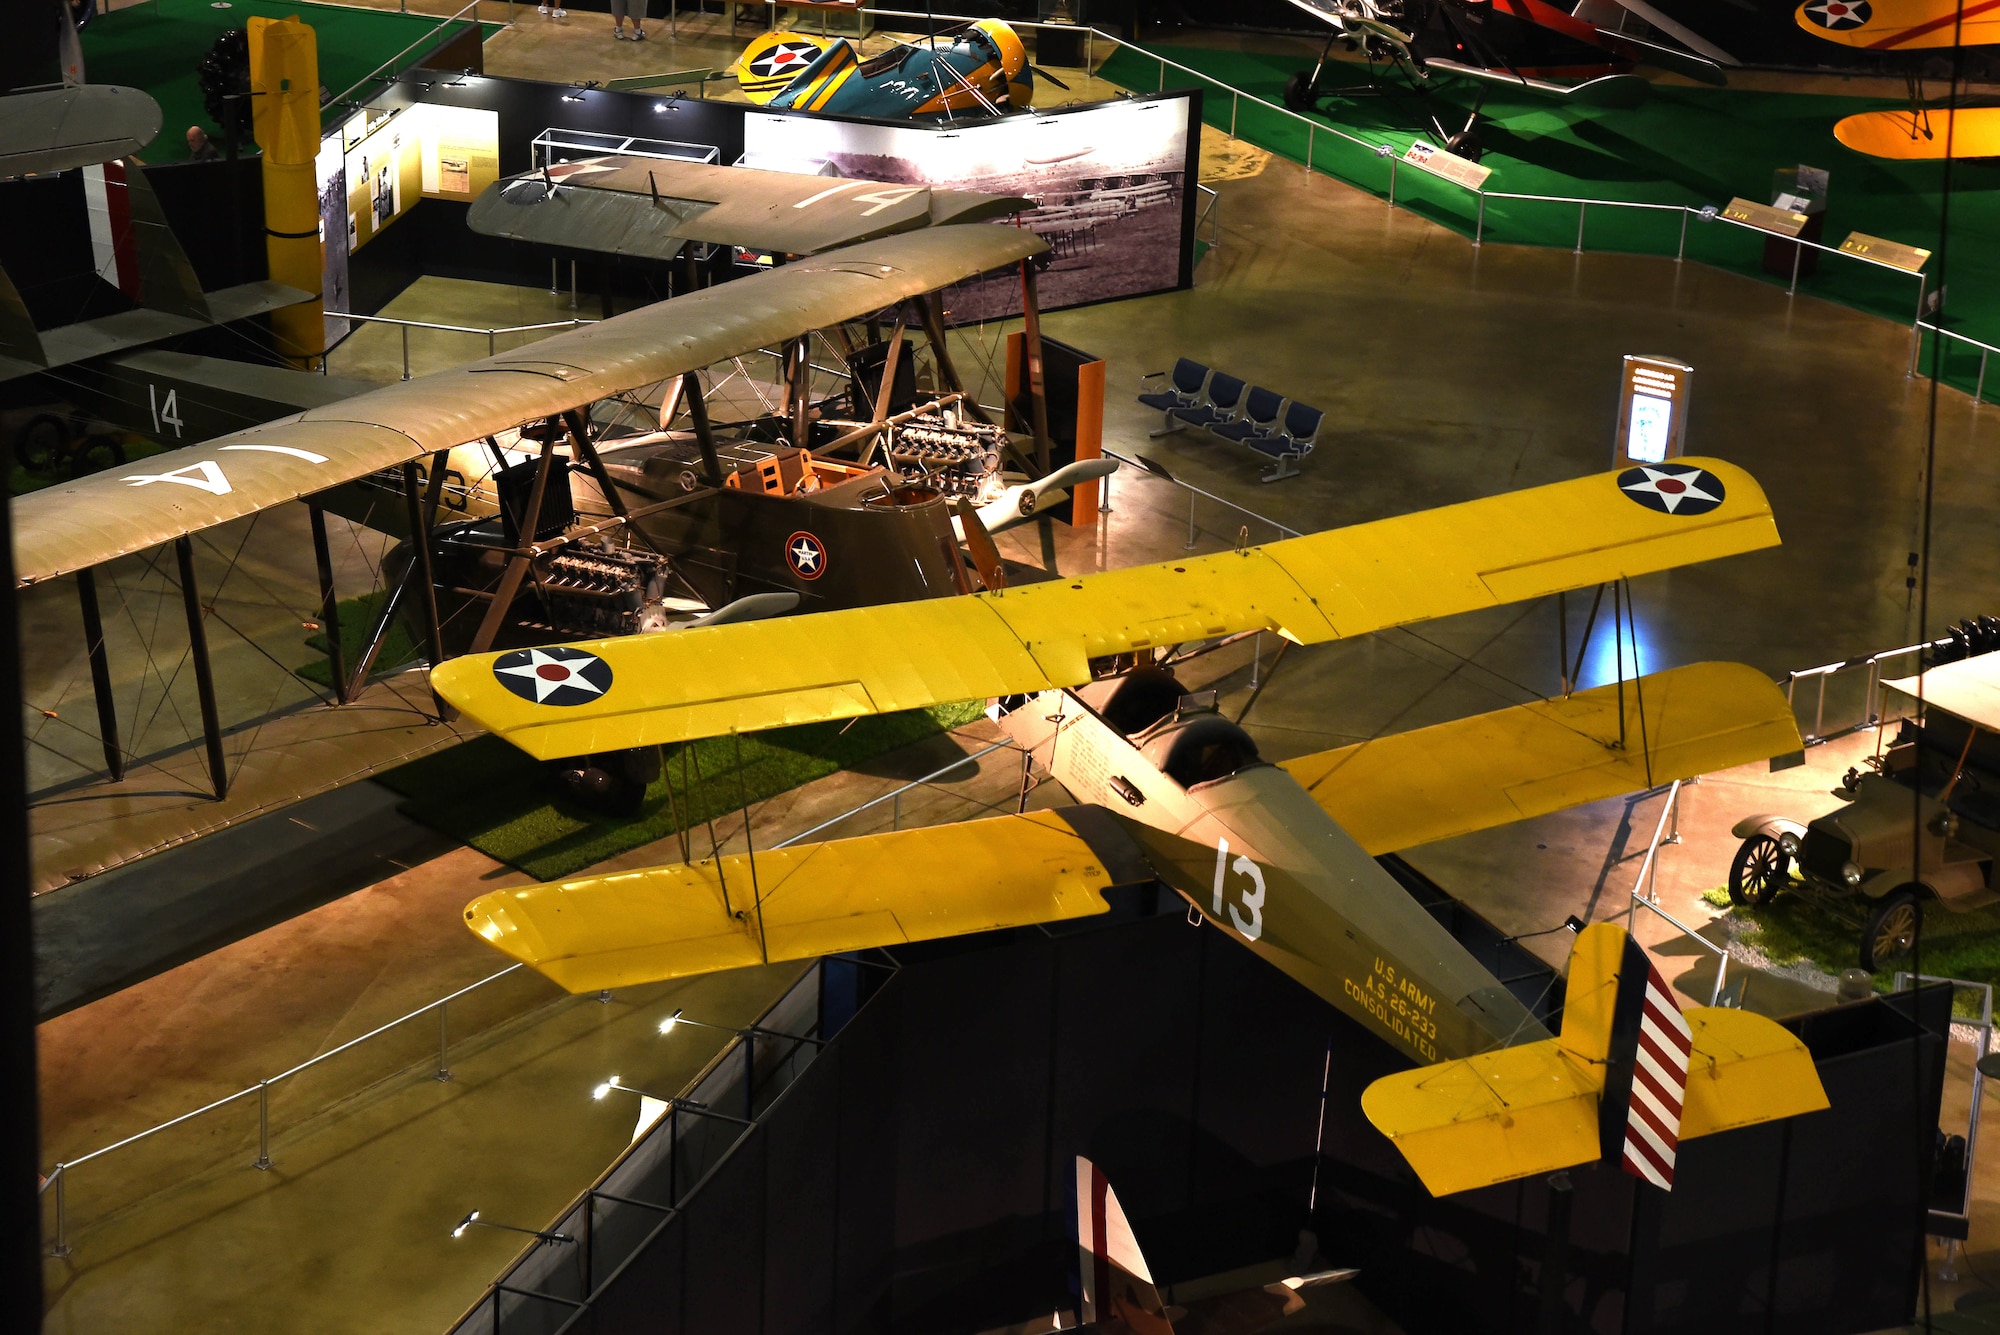 DAYTON, Ohio -- The Early Years Gallery at the National Museum of the United States Air Force. (U.S. Air Force photo)